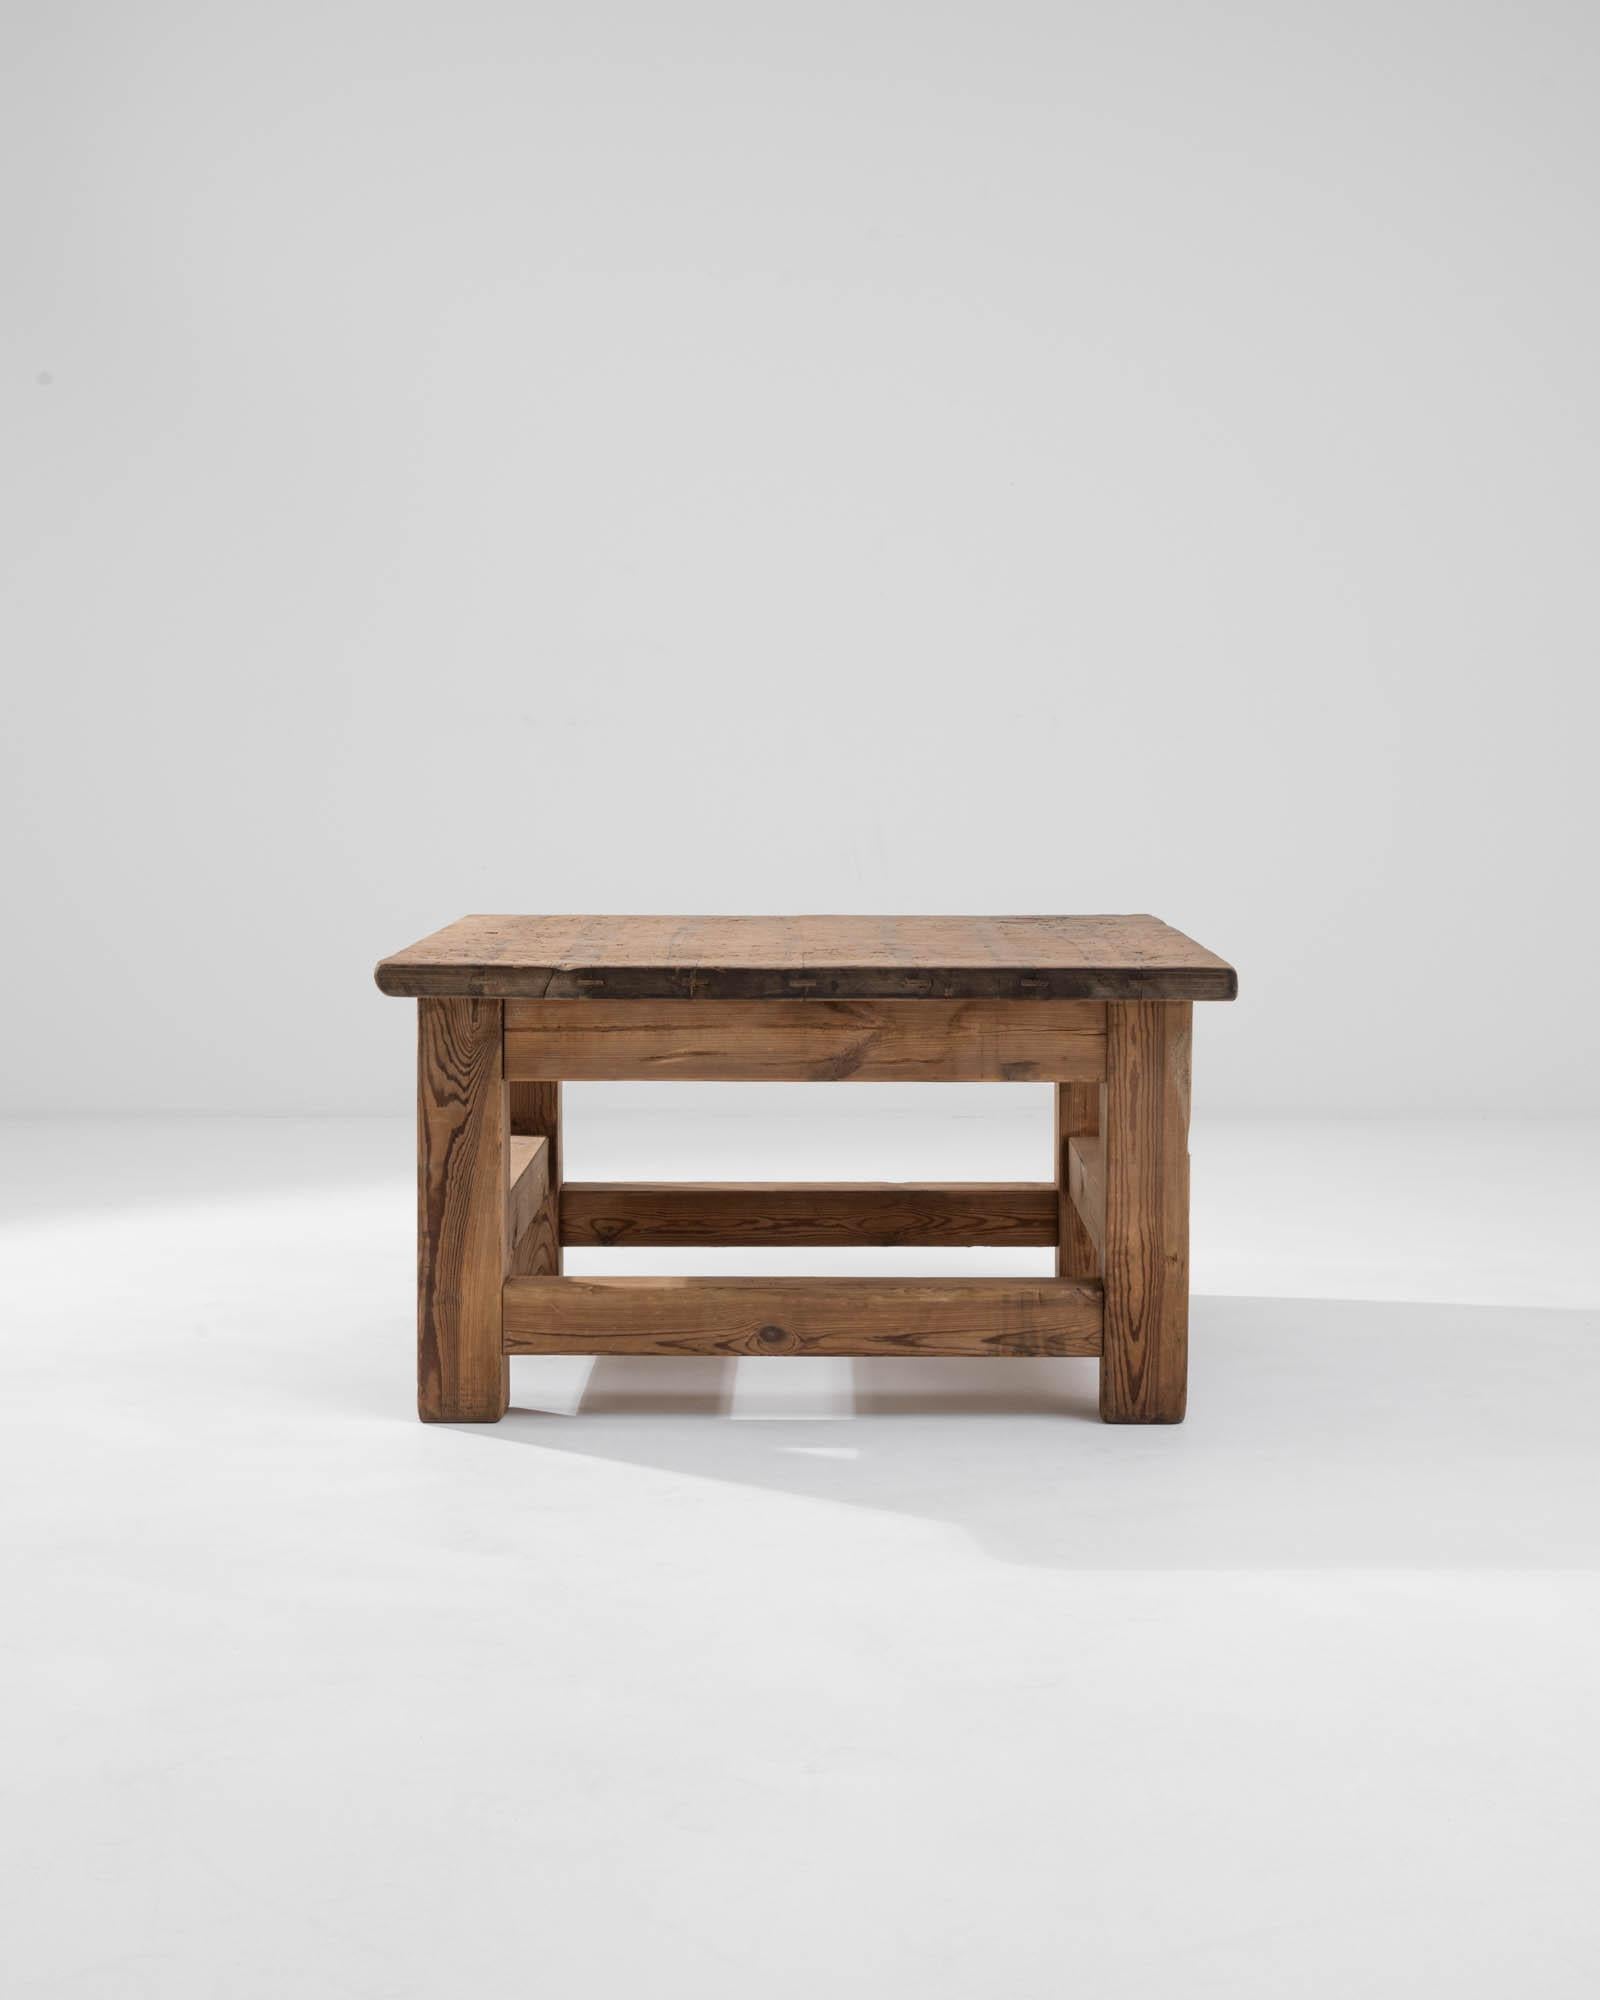 This vintage wooden coffee table, made in Central Europe, showcases an understated silhouette punctuated by its flat tabletop, sturdy square legs, and the interplay of side stretchers built at different levels, creating an asymmetric effect. The